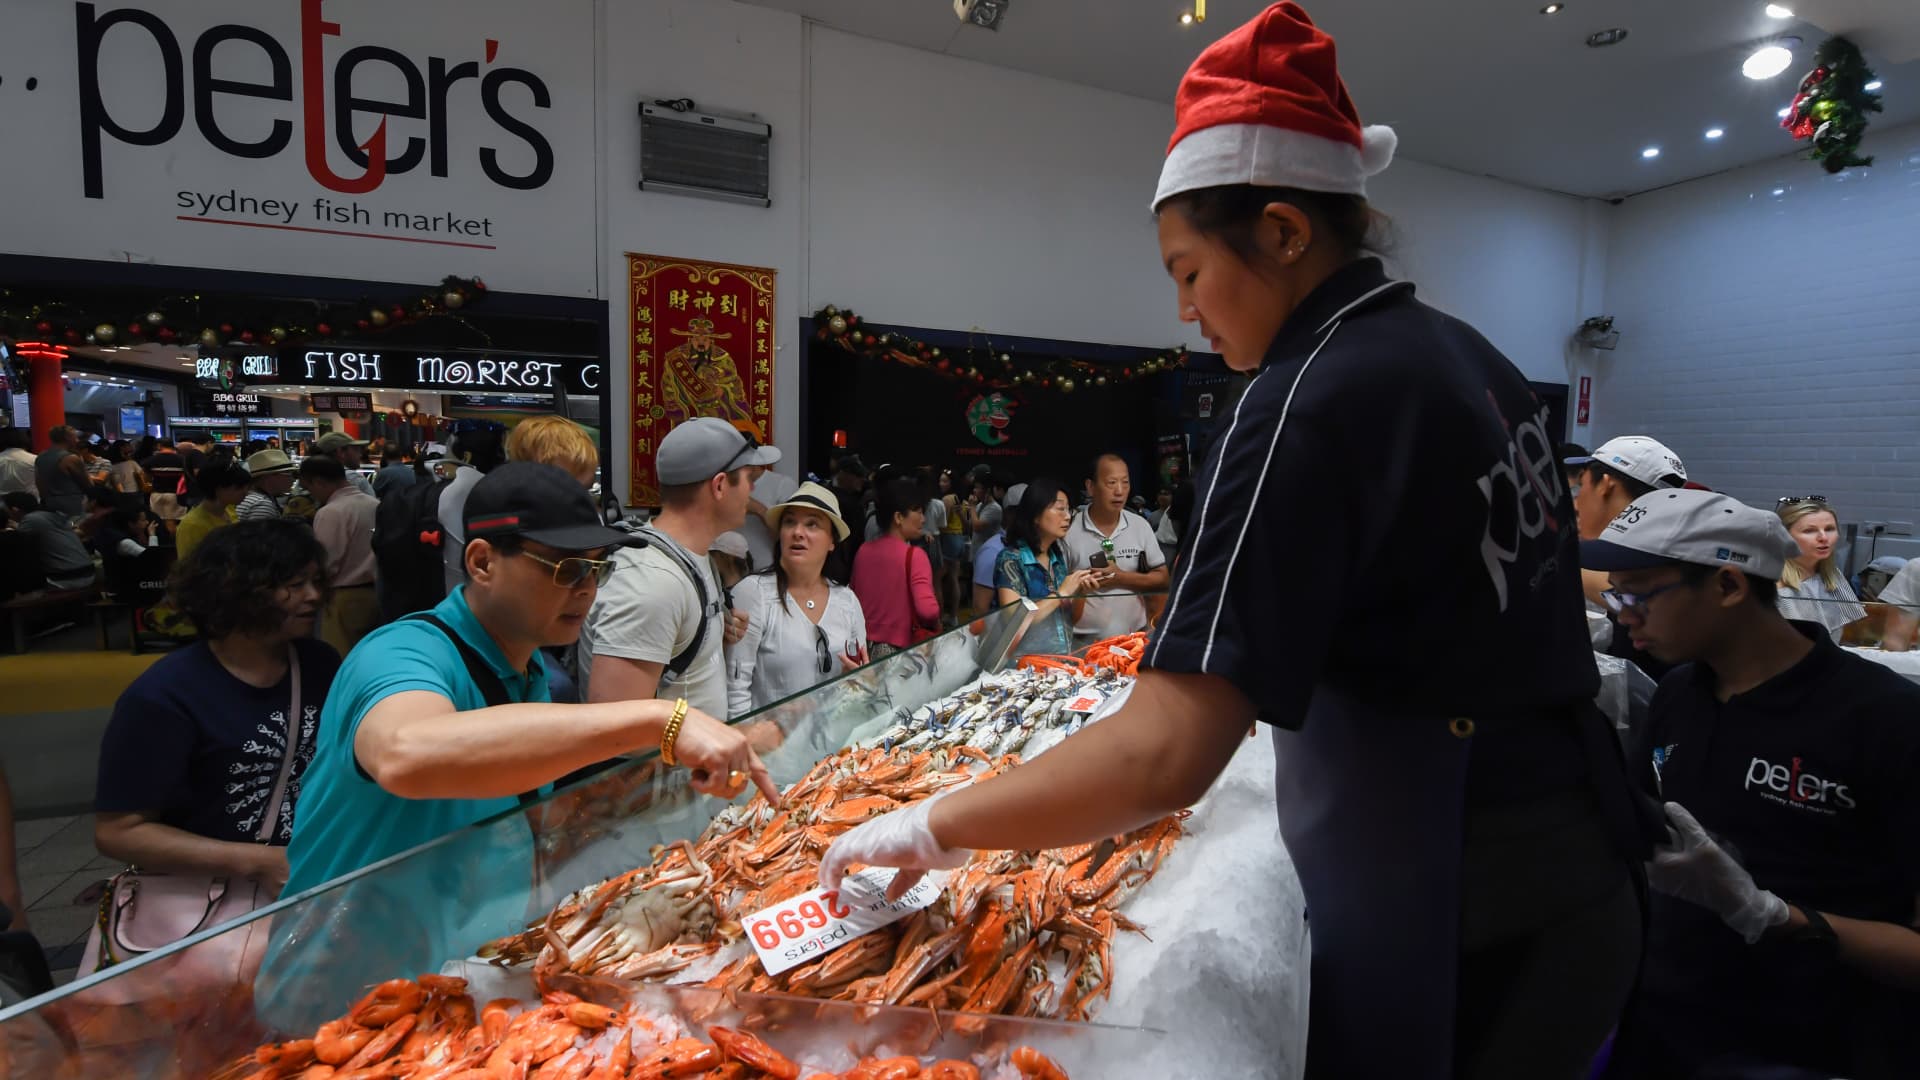 Crowds gather to buy prawns before Christmas at the Sydney Fish Market, which experiences its busiest week of the year before Christmas.